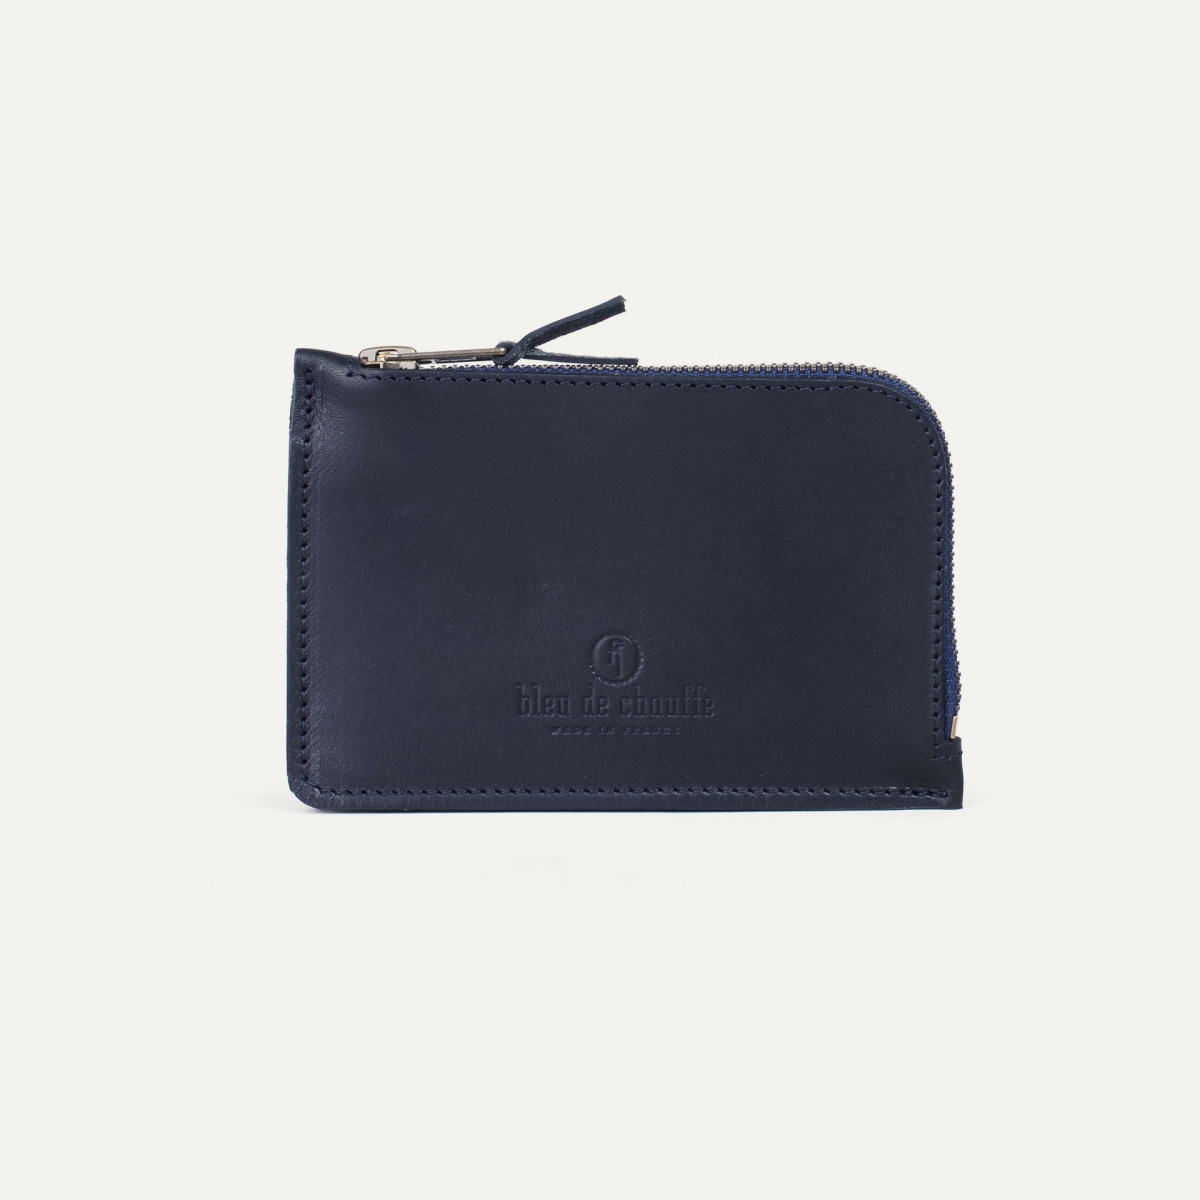 Bring The Prosecco Faux Leather Purse In Navy • Impressions Online Boutique